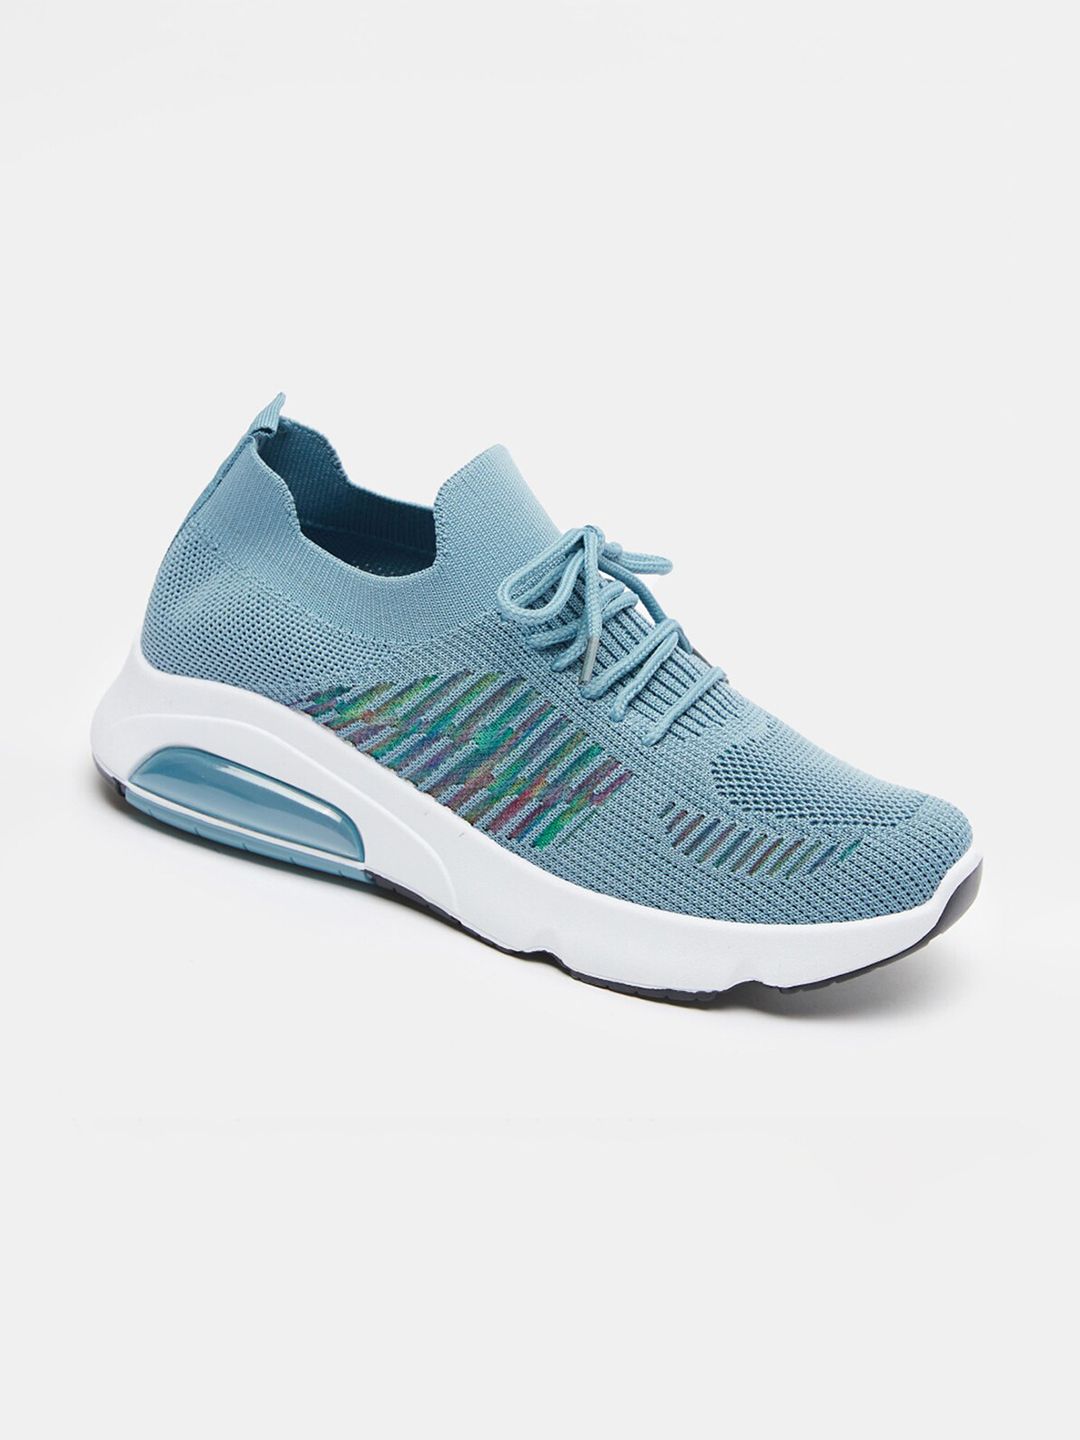 shoexpress Women Blue Textile Running Non-Marking Shoes Price in India